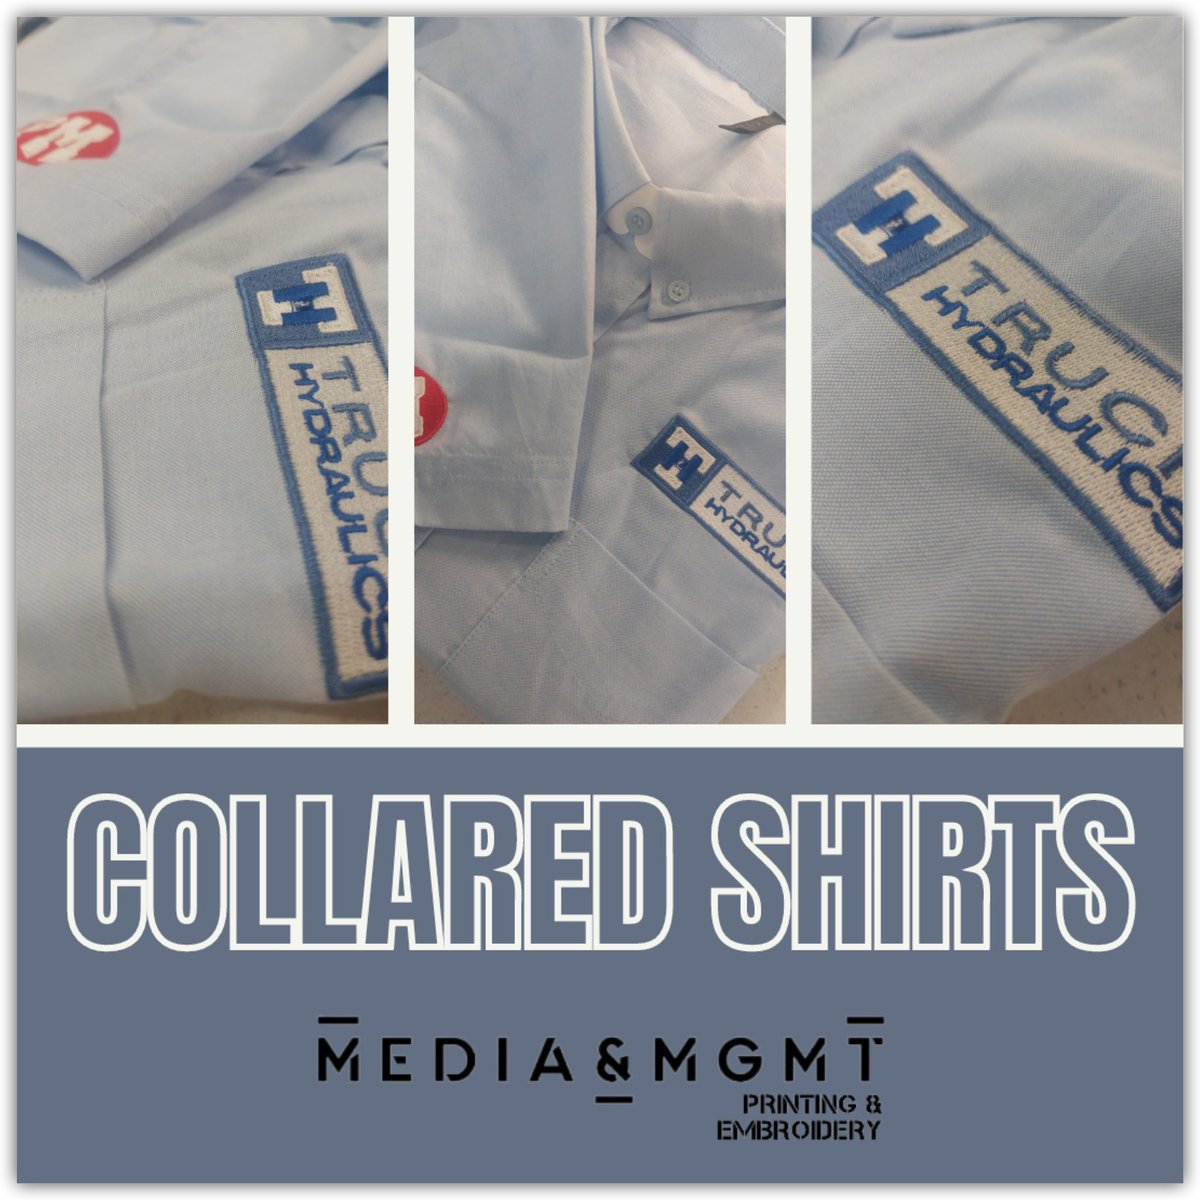 👔✨ Elevate Your Workwear Game! ✨👔 Step up your professional look with our premium collared shirts, perfect for any workplace. Make a lasting impression with style and quality! 🌟 Head to our website under “Workwear” mgmt-print.co.uk #mediamgmtprintingandembroidery